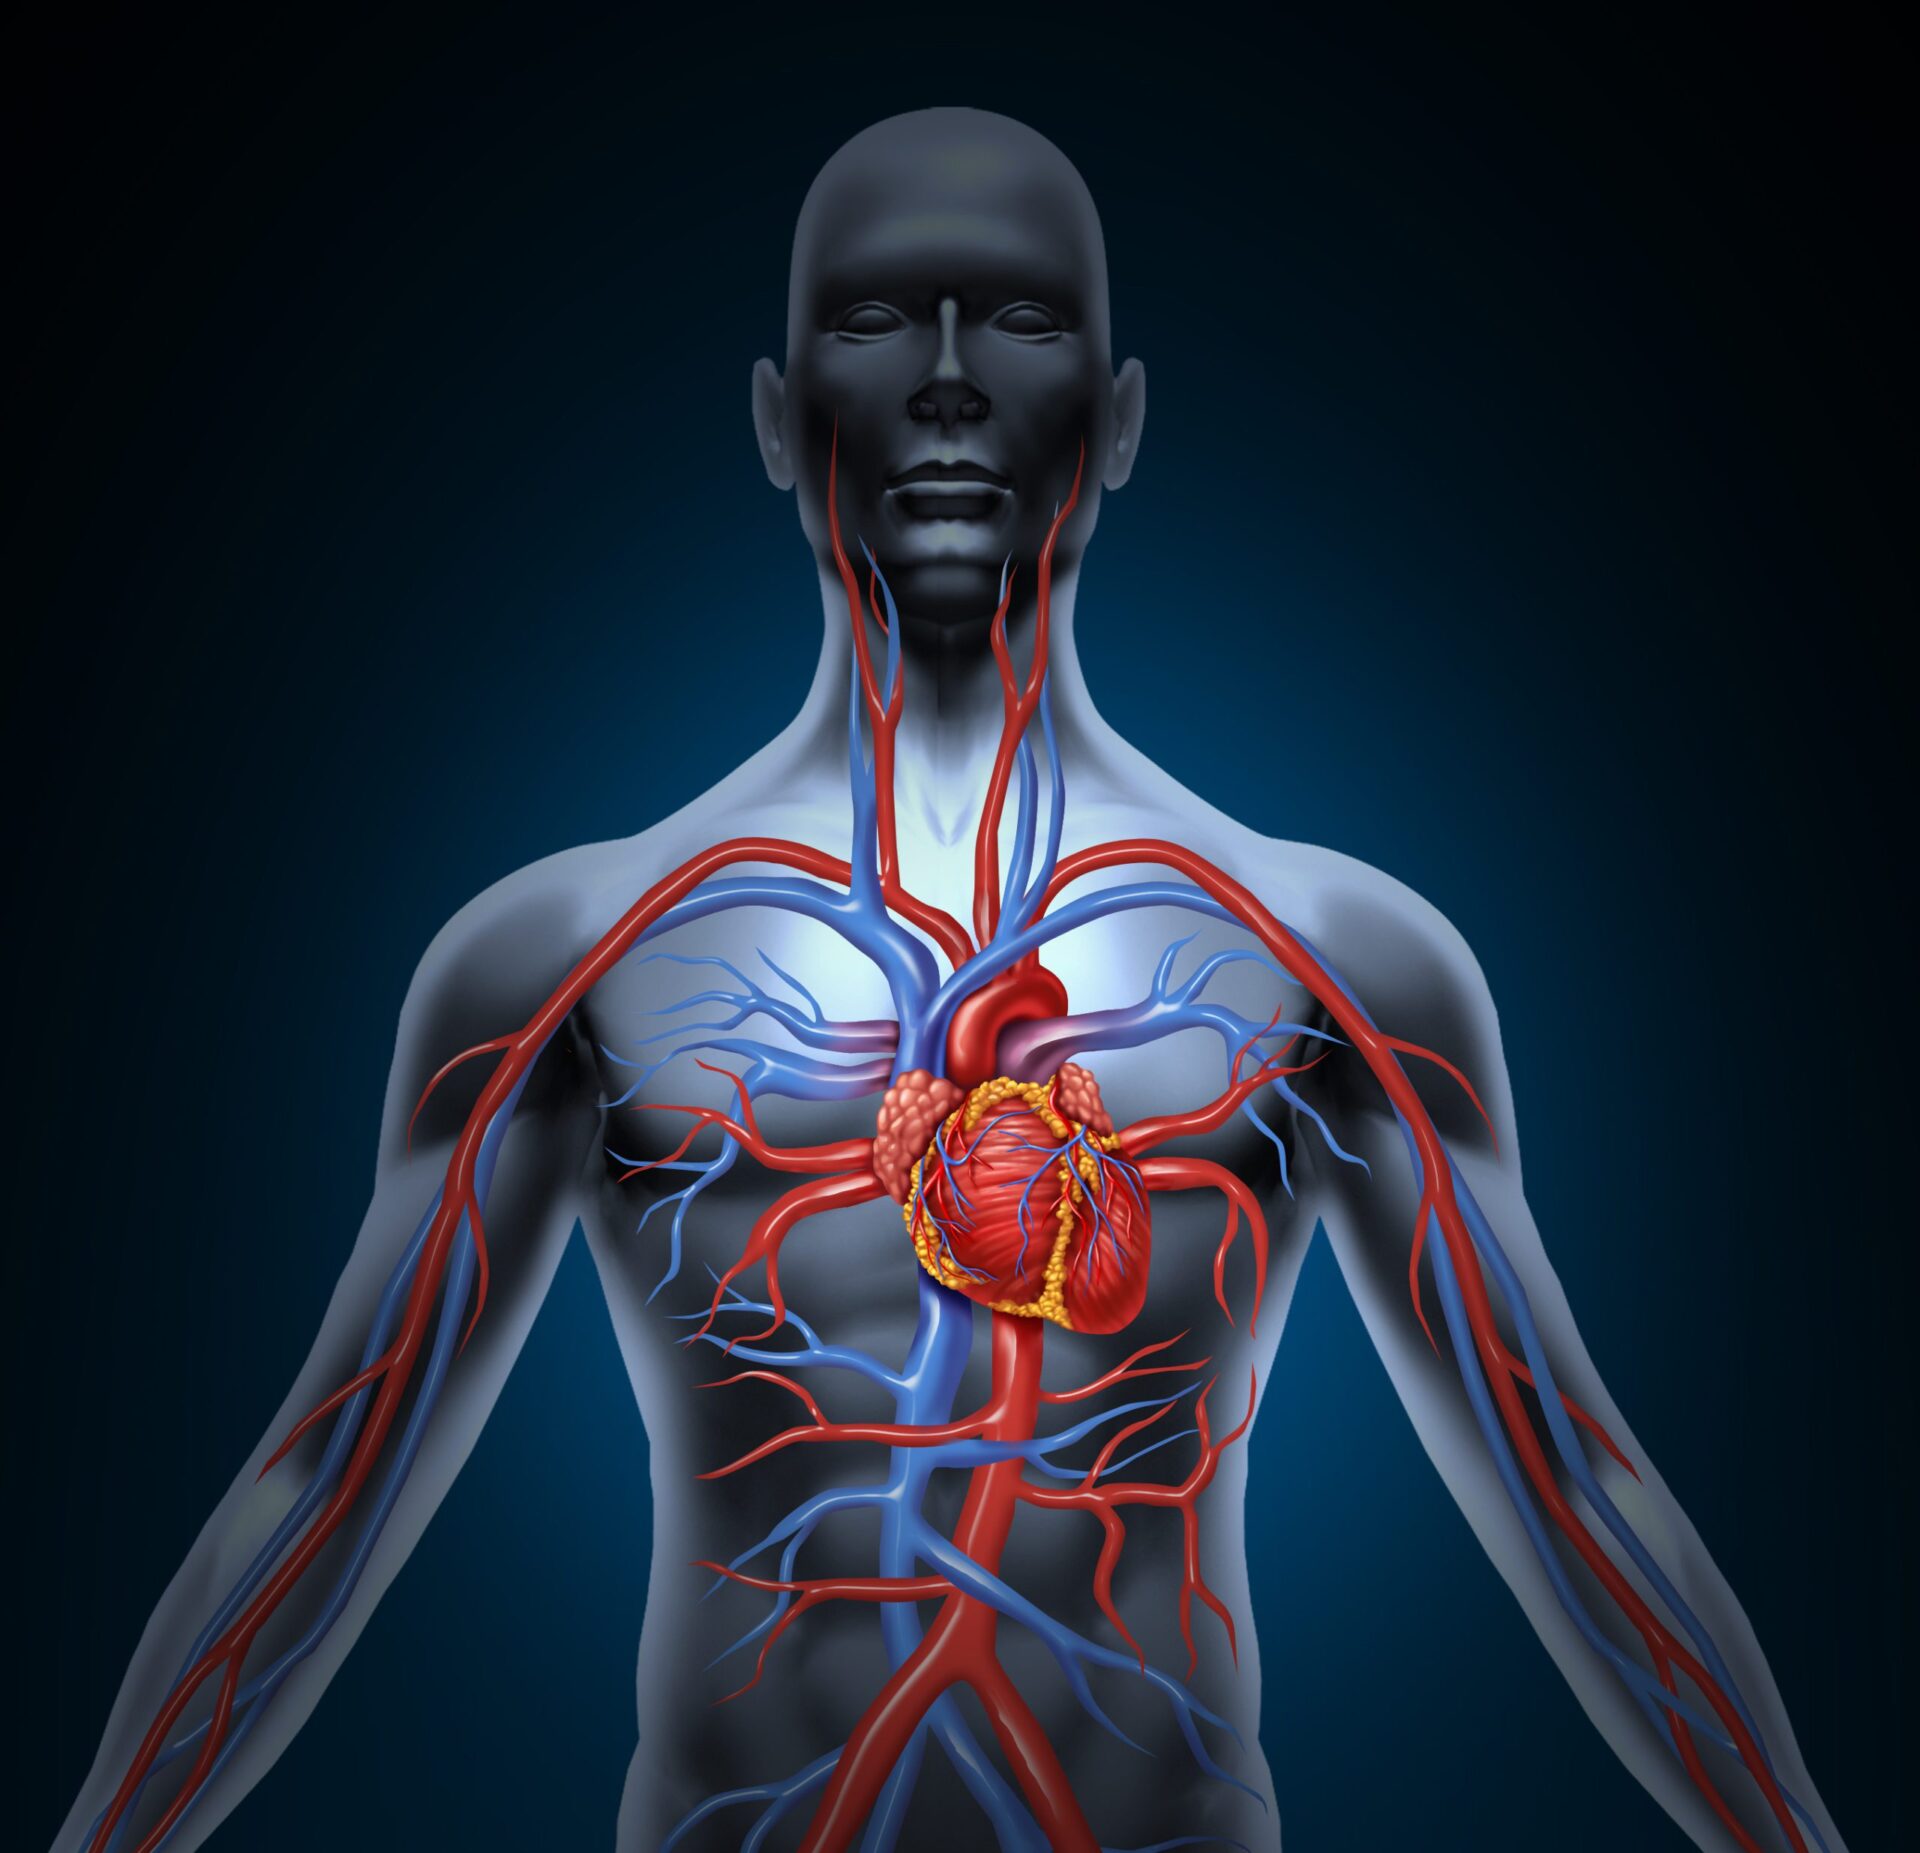 3D art of a human torso showing the cardiovascular system